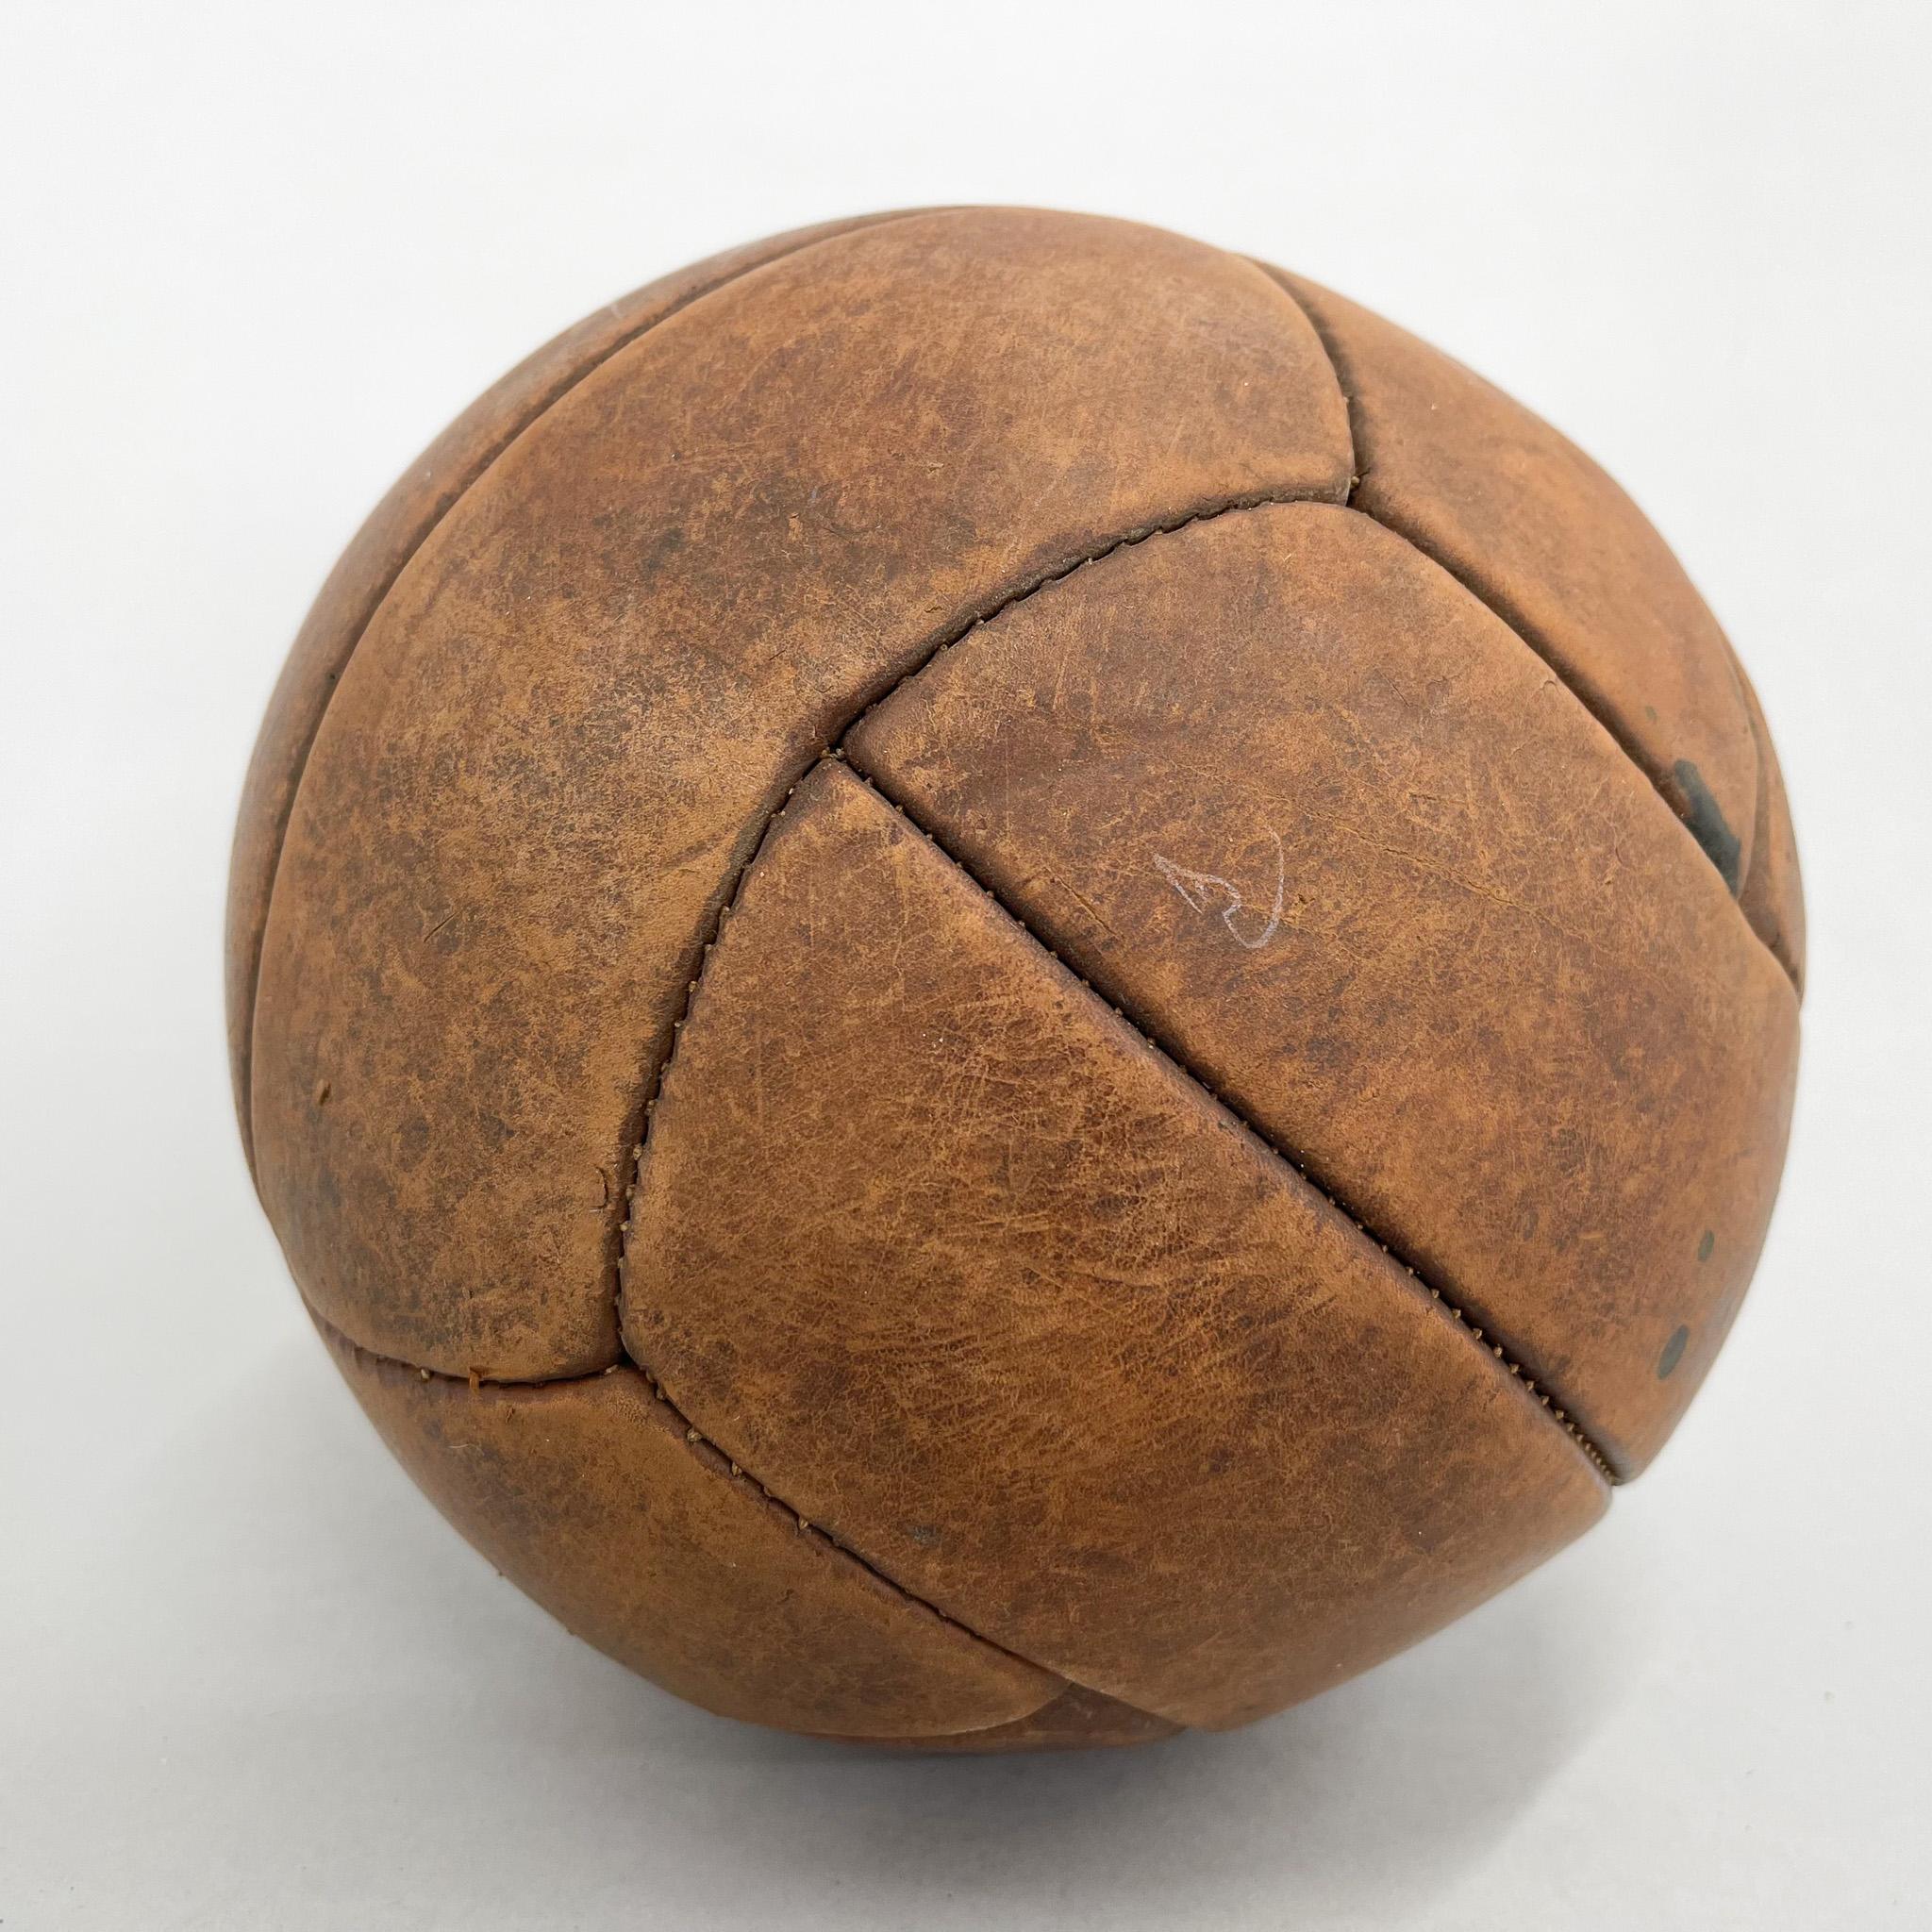 Original vintage heavy leather training ball with beautiful patina. The ball is made of handstitched genuine leather in former Czechoslovakia in the 1930s. It can be used as an original interior accessory or as a stylish training aid. The leather